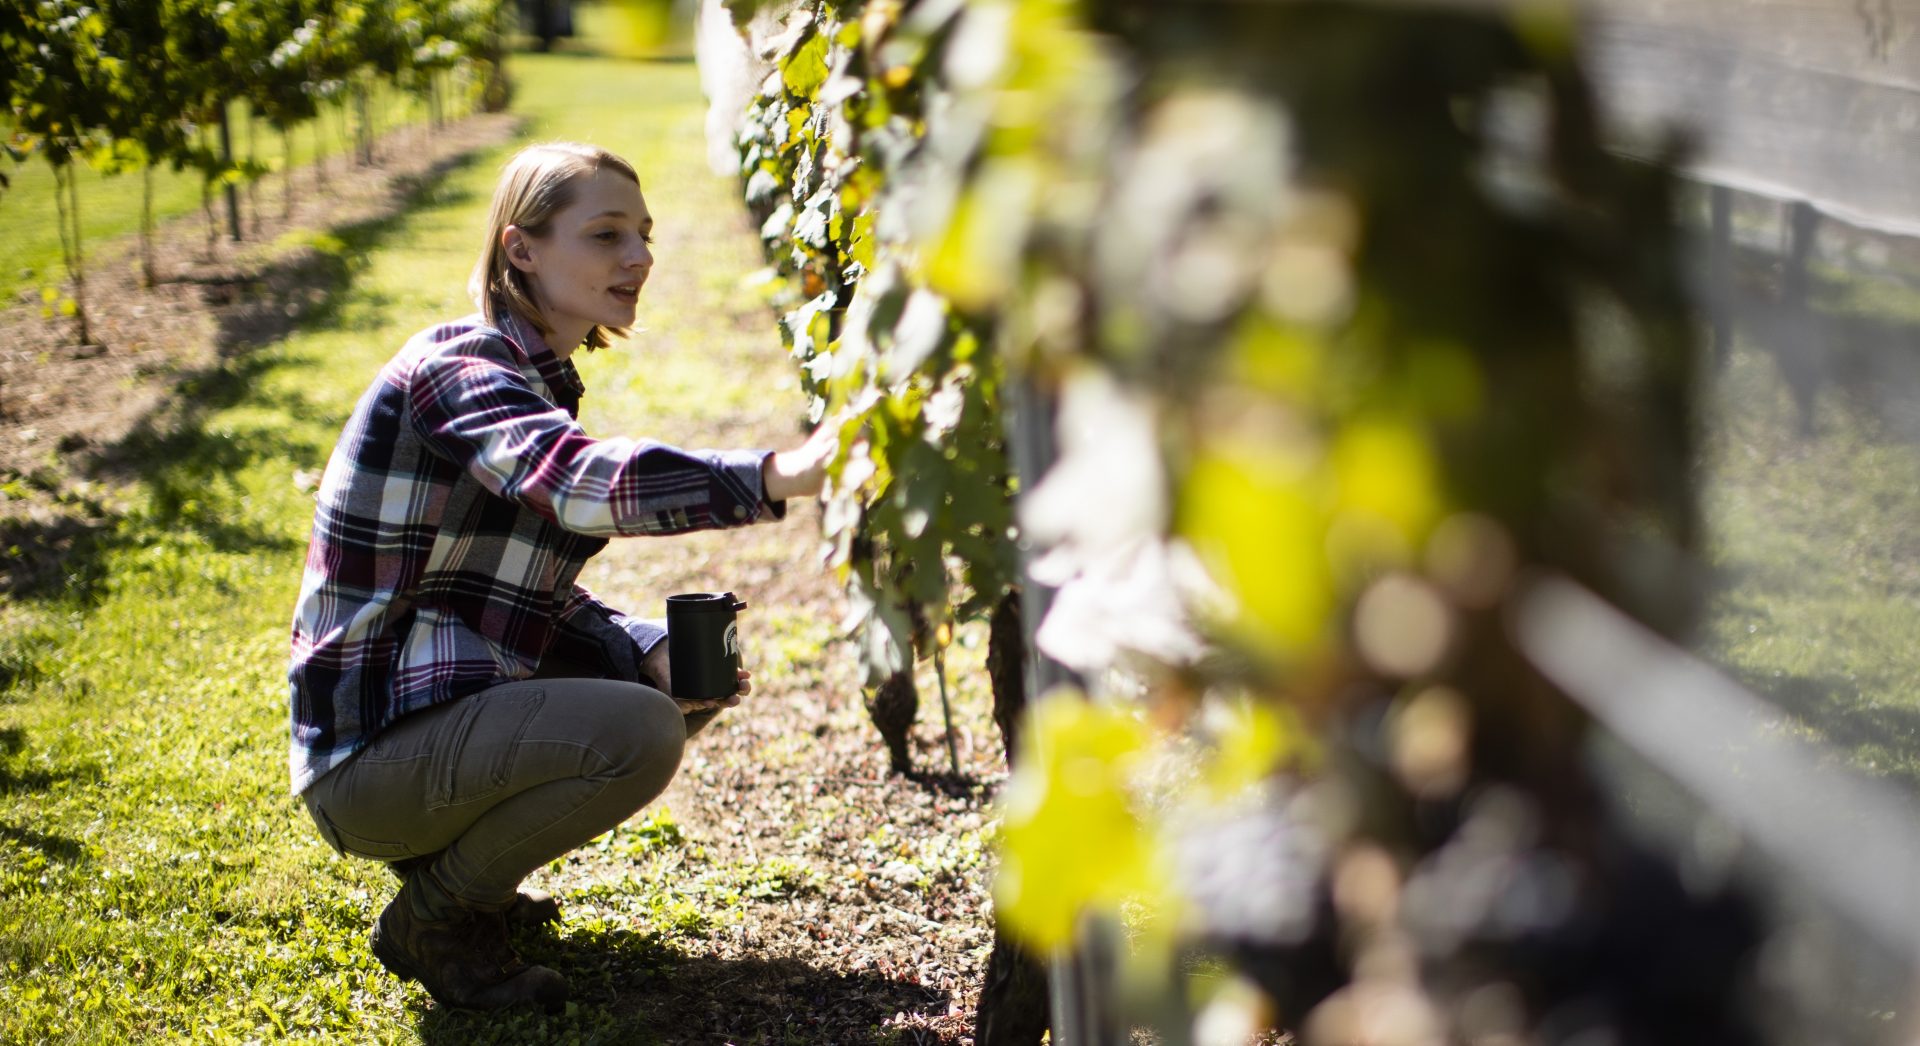 In this Thursday, Sept. 19, 2019, photo, Heather Leach, an entomologist who does lanternfly outreach at Penn State Extension inspect grape vines in Kutztown, Pa. The spotted lanternfly has emerged as a serious pest since the federal government confirmed its arrival in southeastern Pennsylvania five years ago this week. 